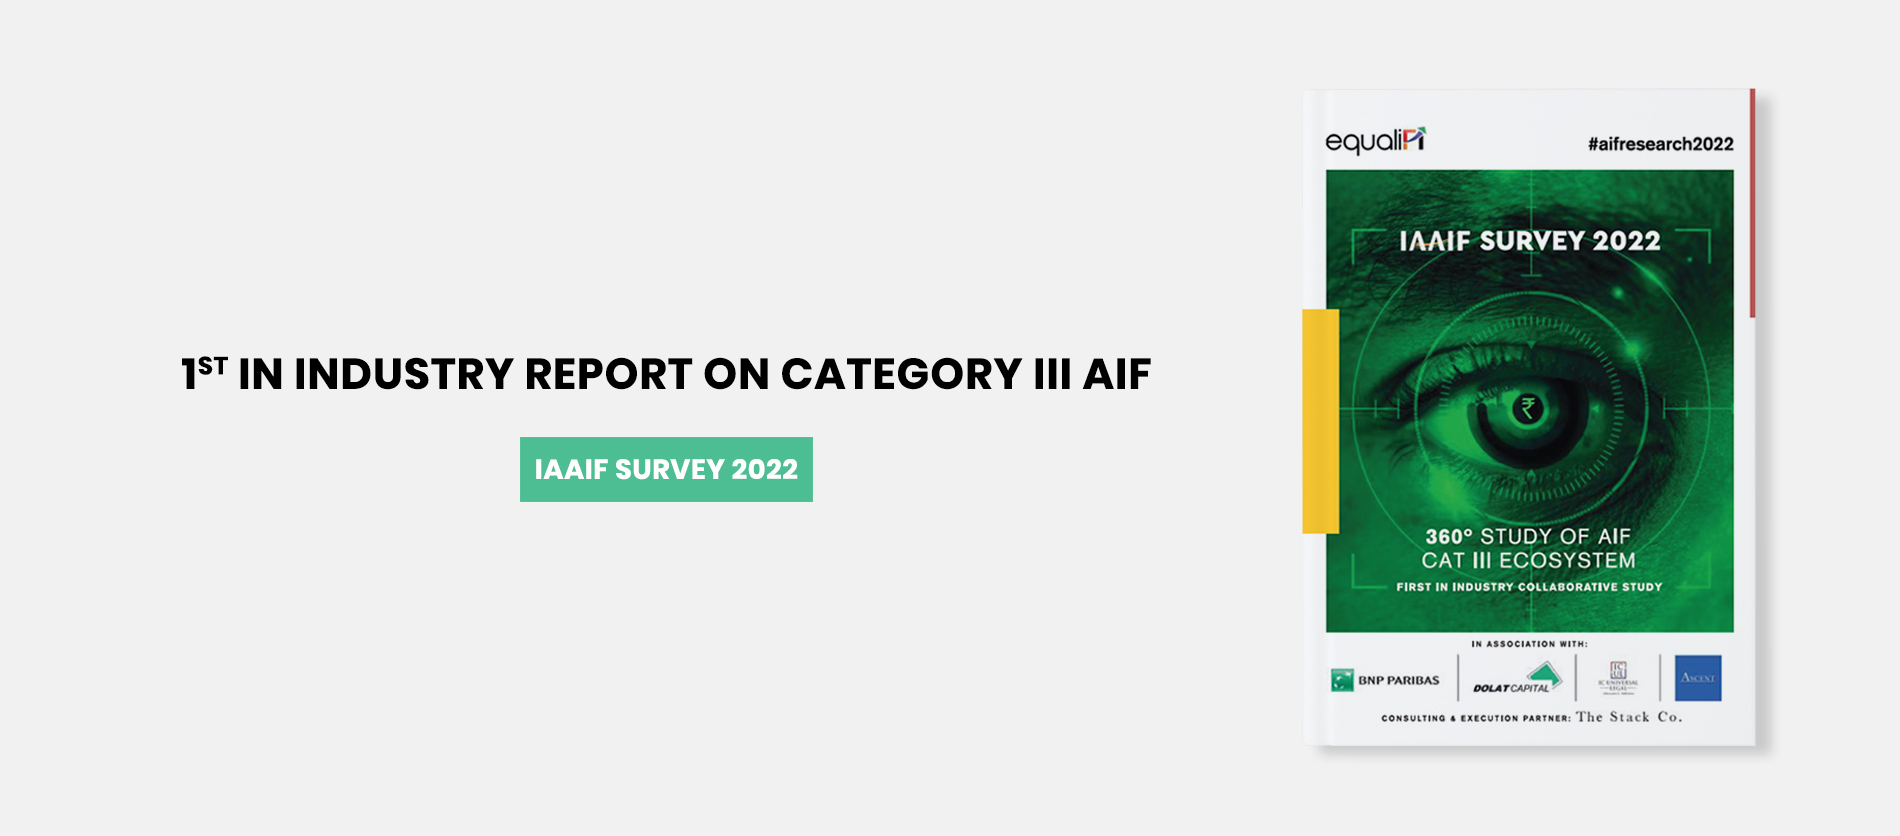 1st in industry report on Category III AIF